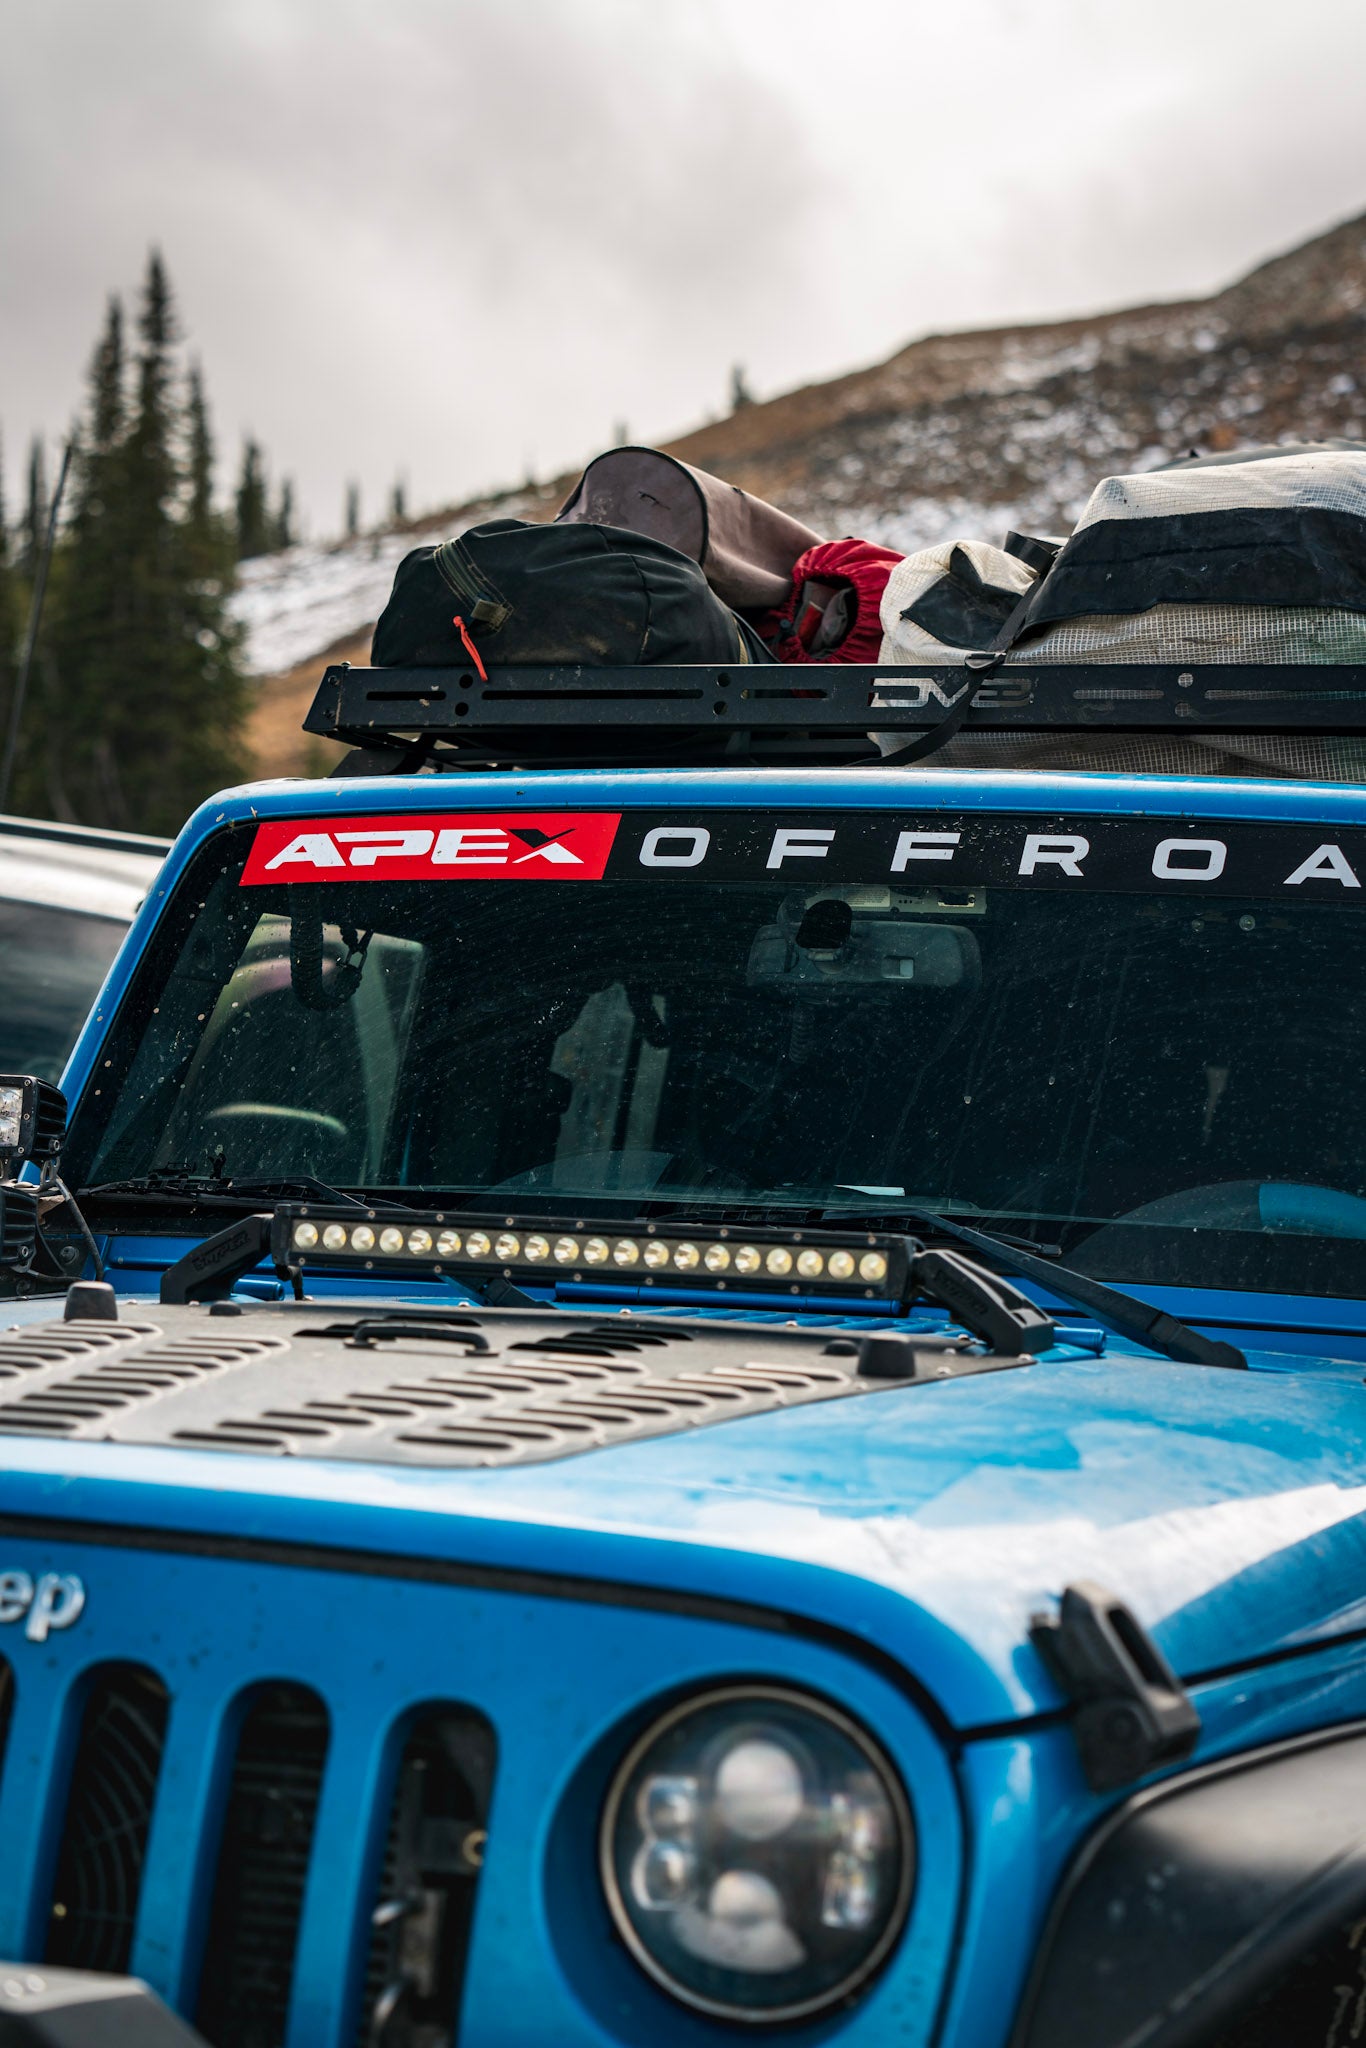 Blue Jeep with "Apex Offroad" decal on windshield